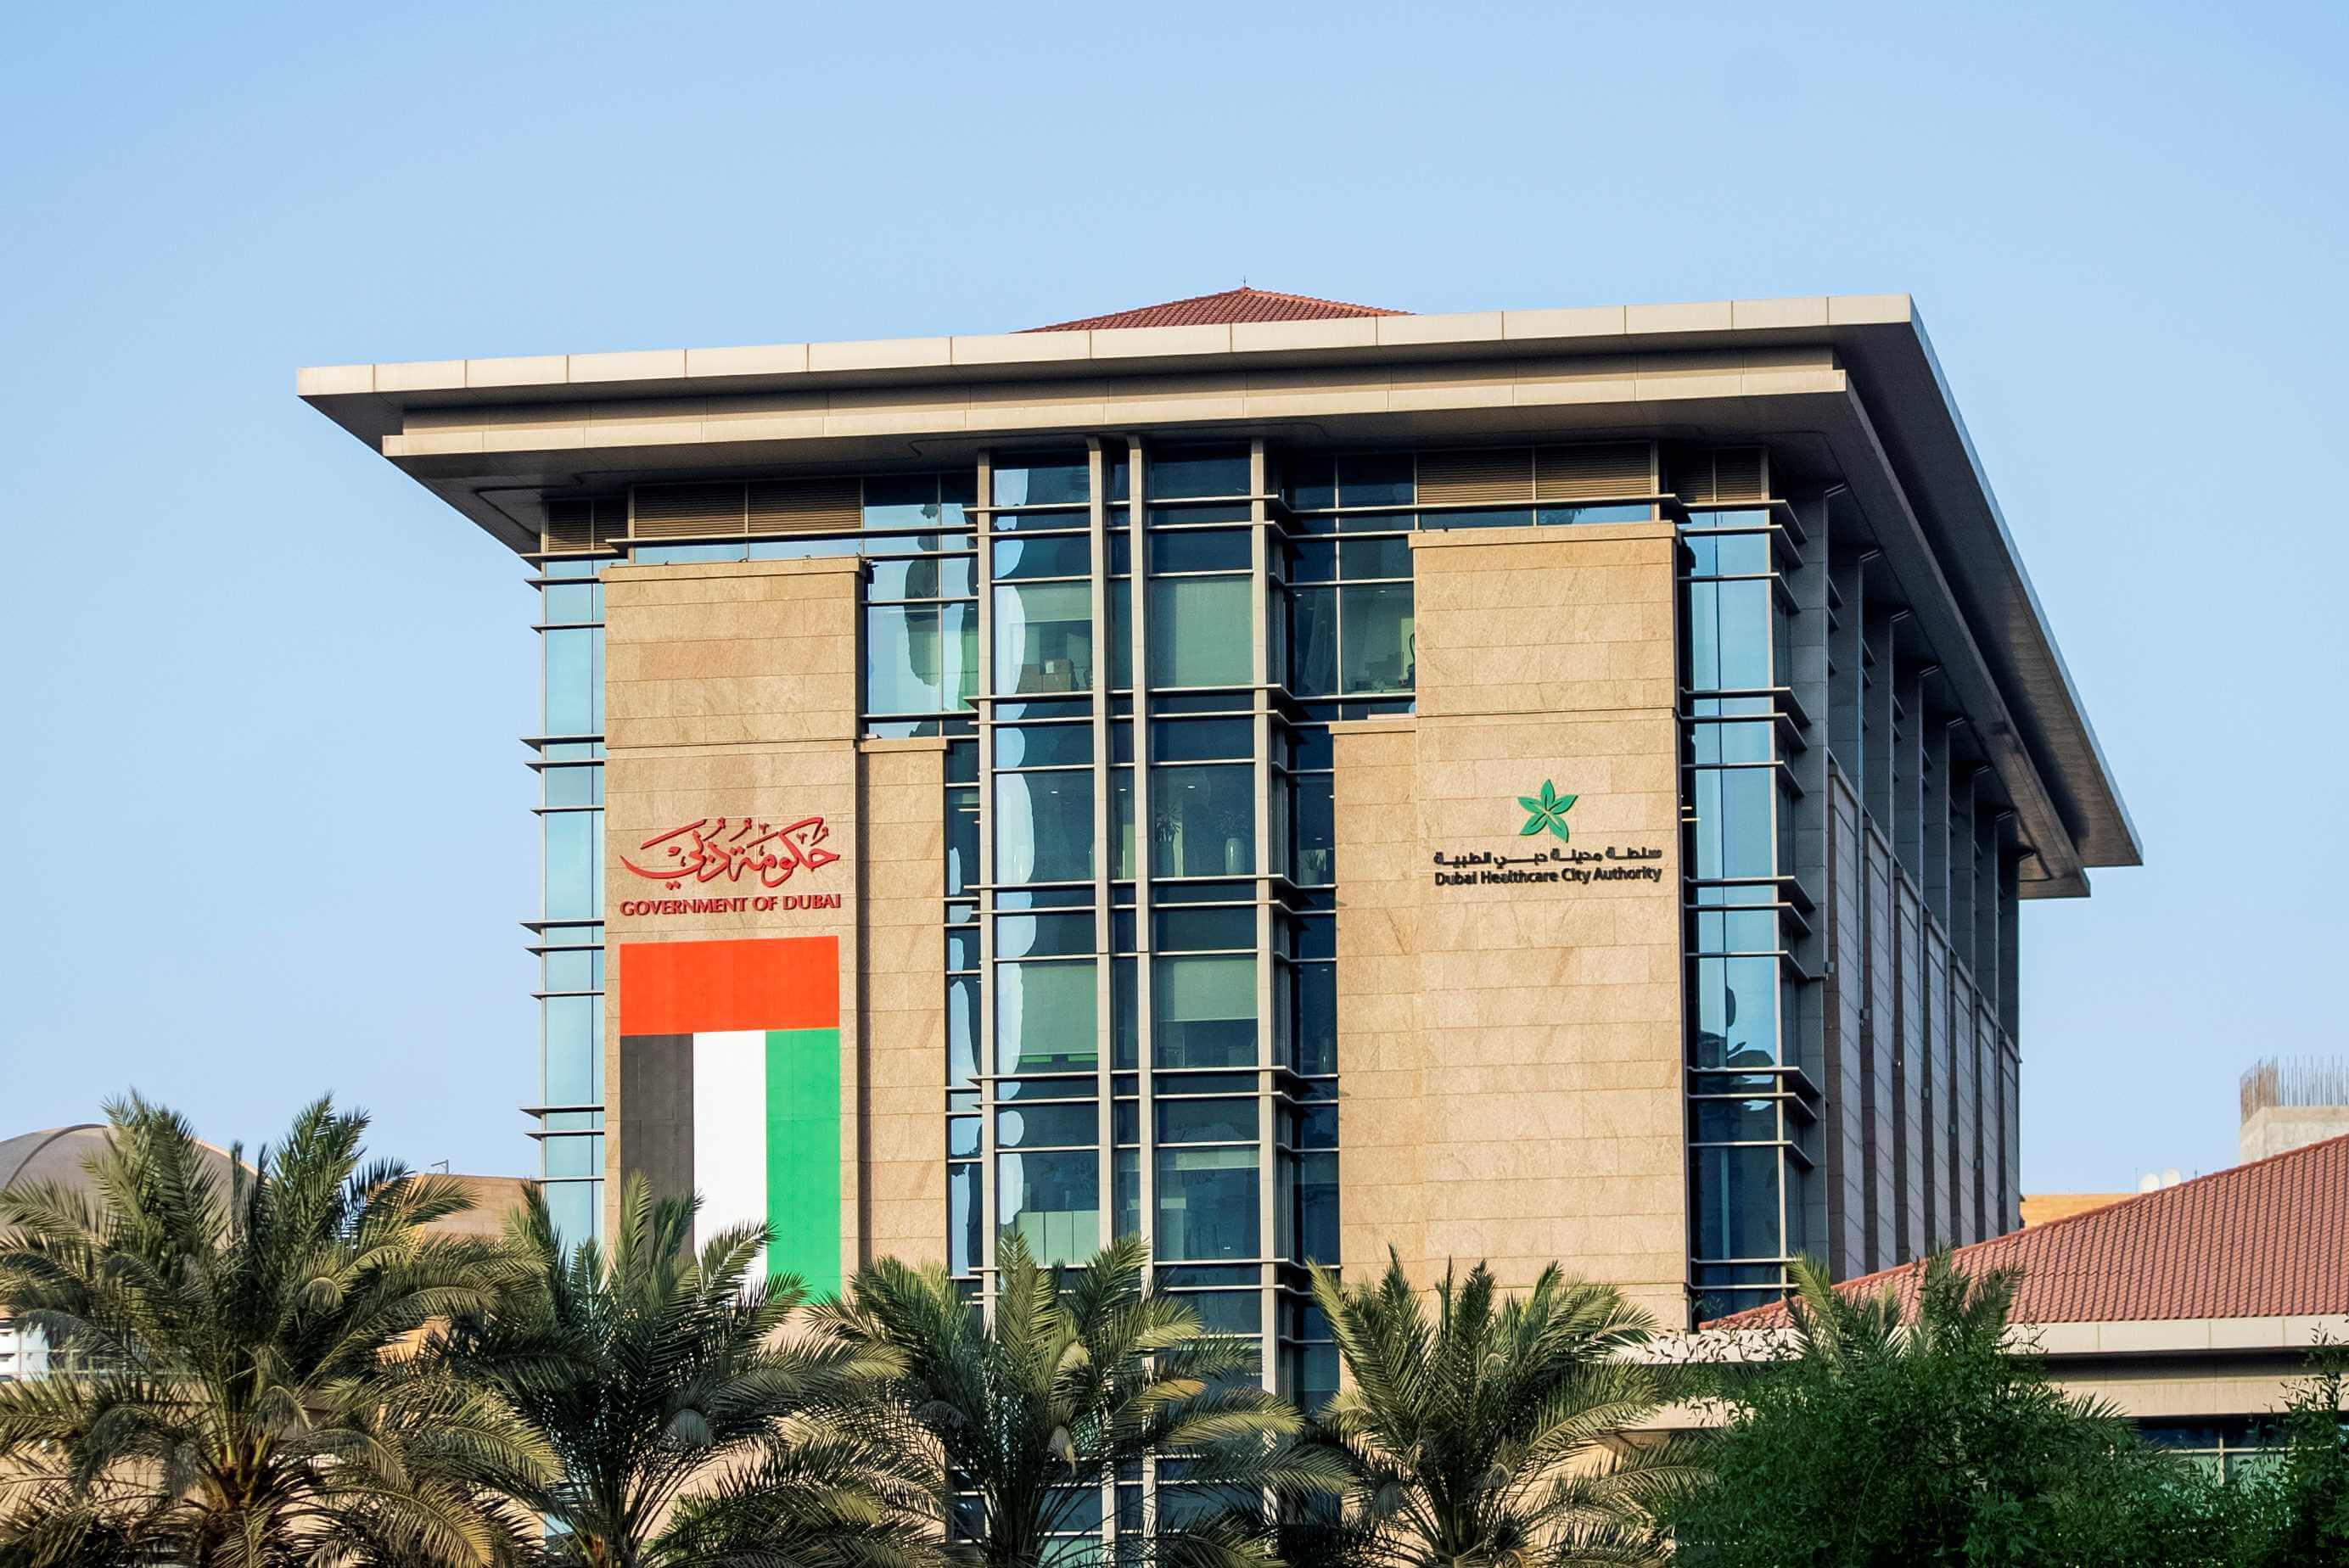 Dubai Healthcare City Records a 12% Year-on-Year Increase as it Celebrates 21 Years of Excellence and Empowering Partnerships